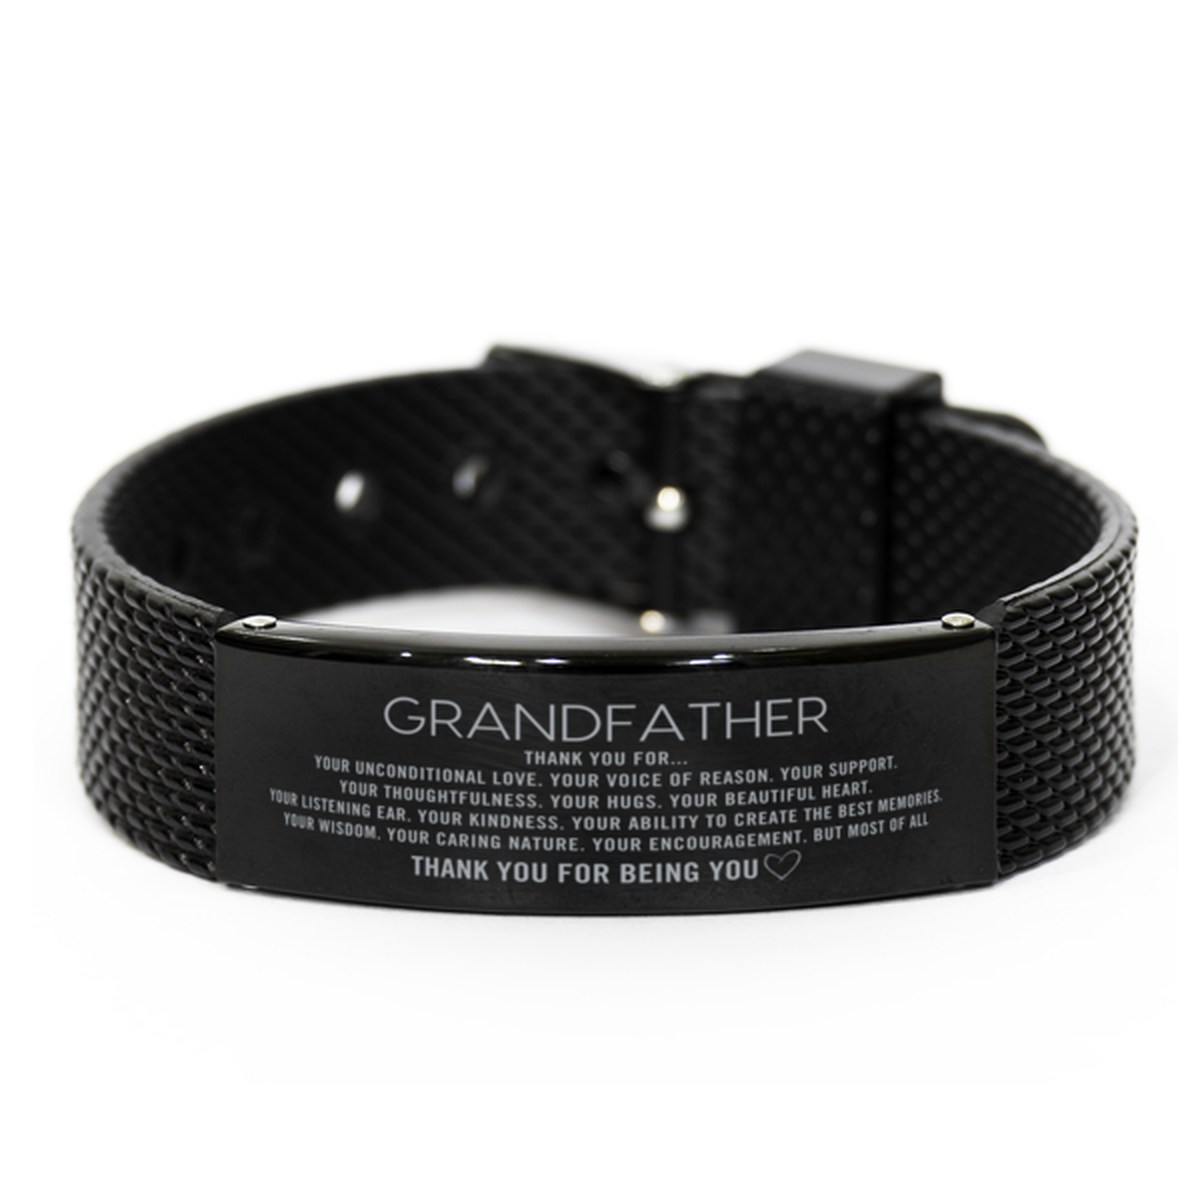 Grandfather Black Shark Mesh Bracelet Custom, Engraved Gifts For Grandfather Christmas Graduation Birthday Gifts for Men Women Grandfather Thank you for Your unconditional love